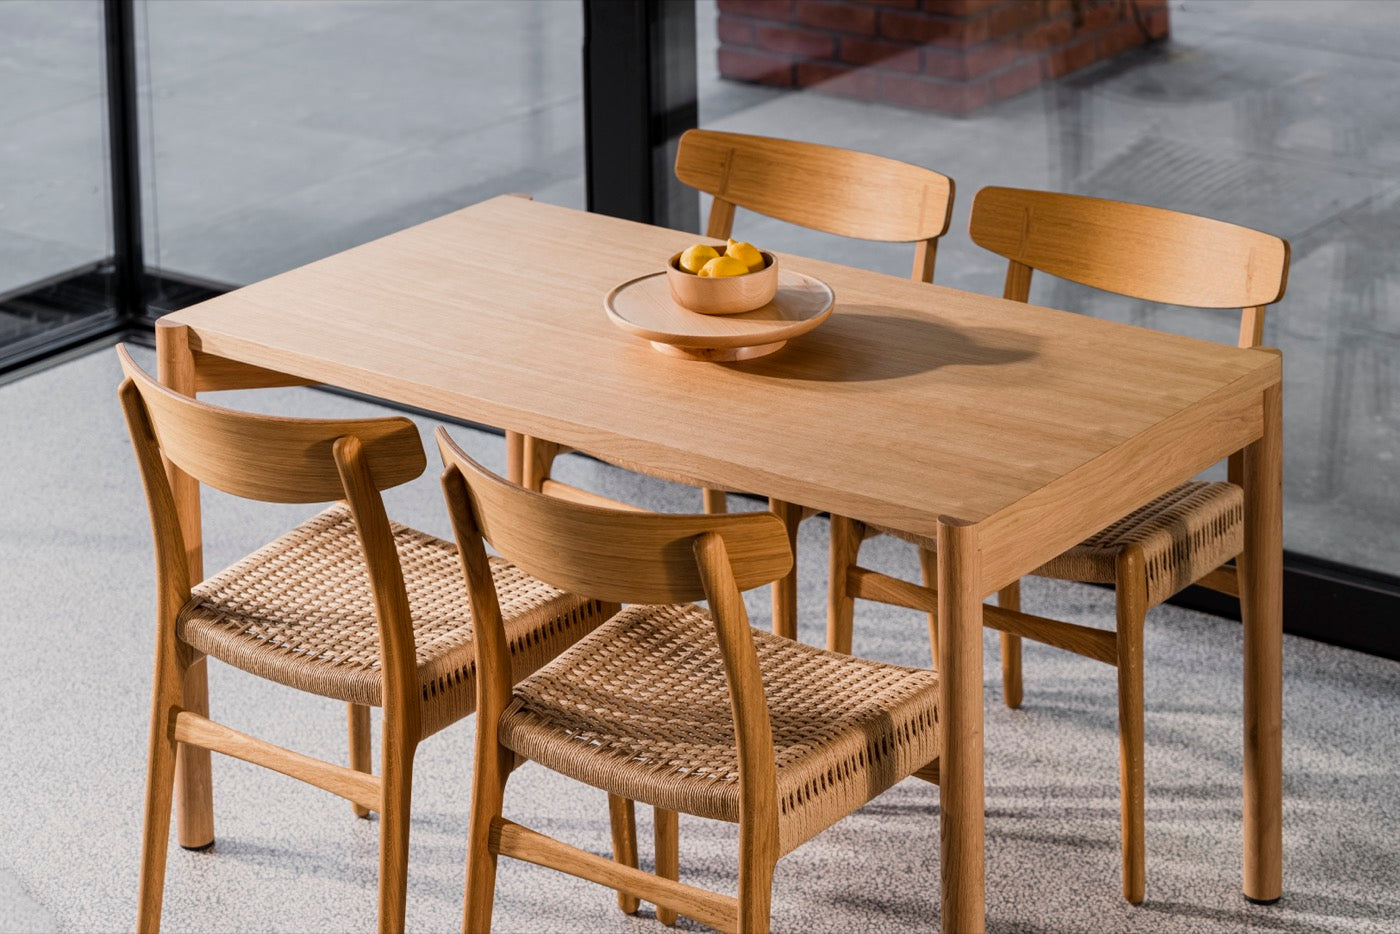 From intimate dinners to lavish feasts, modern dining room inspiration is just a few clicks away. Browse round & rectangular tables, benches, chairs, bar trolleys, and bar stools for japandi or minimalist spaces. Suitable for small and spacious homes.